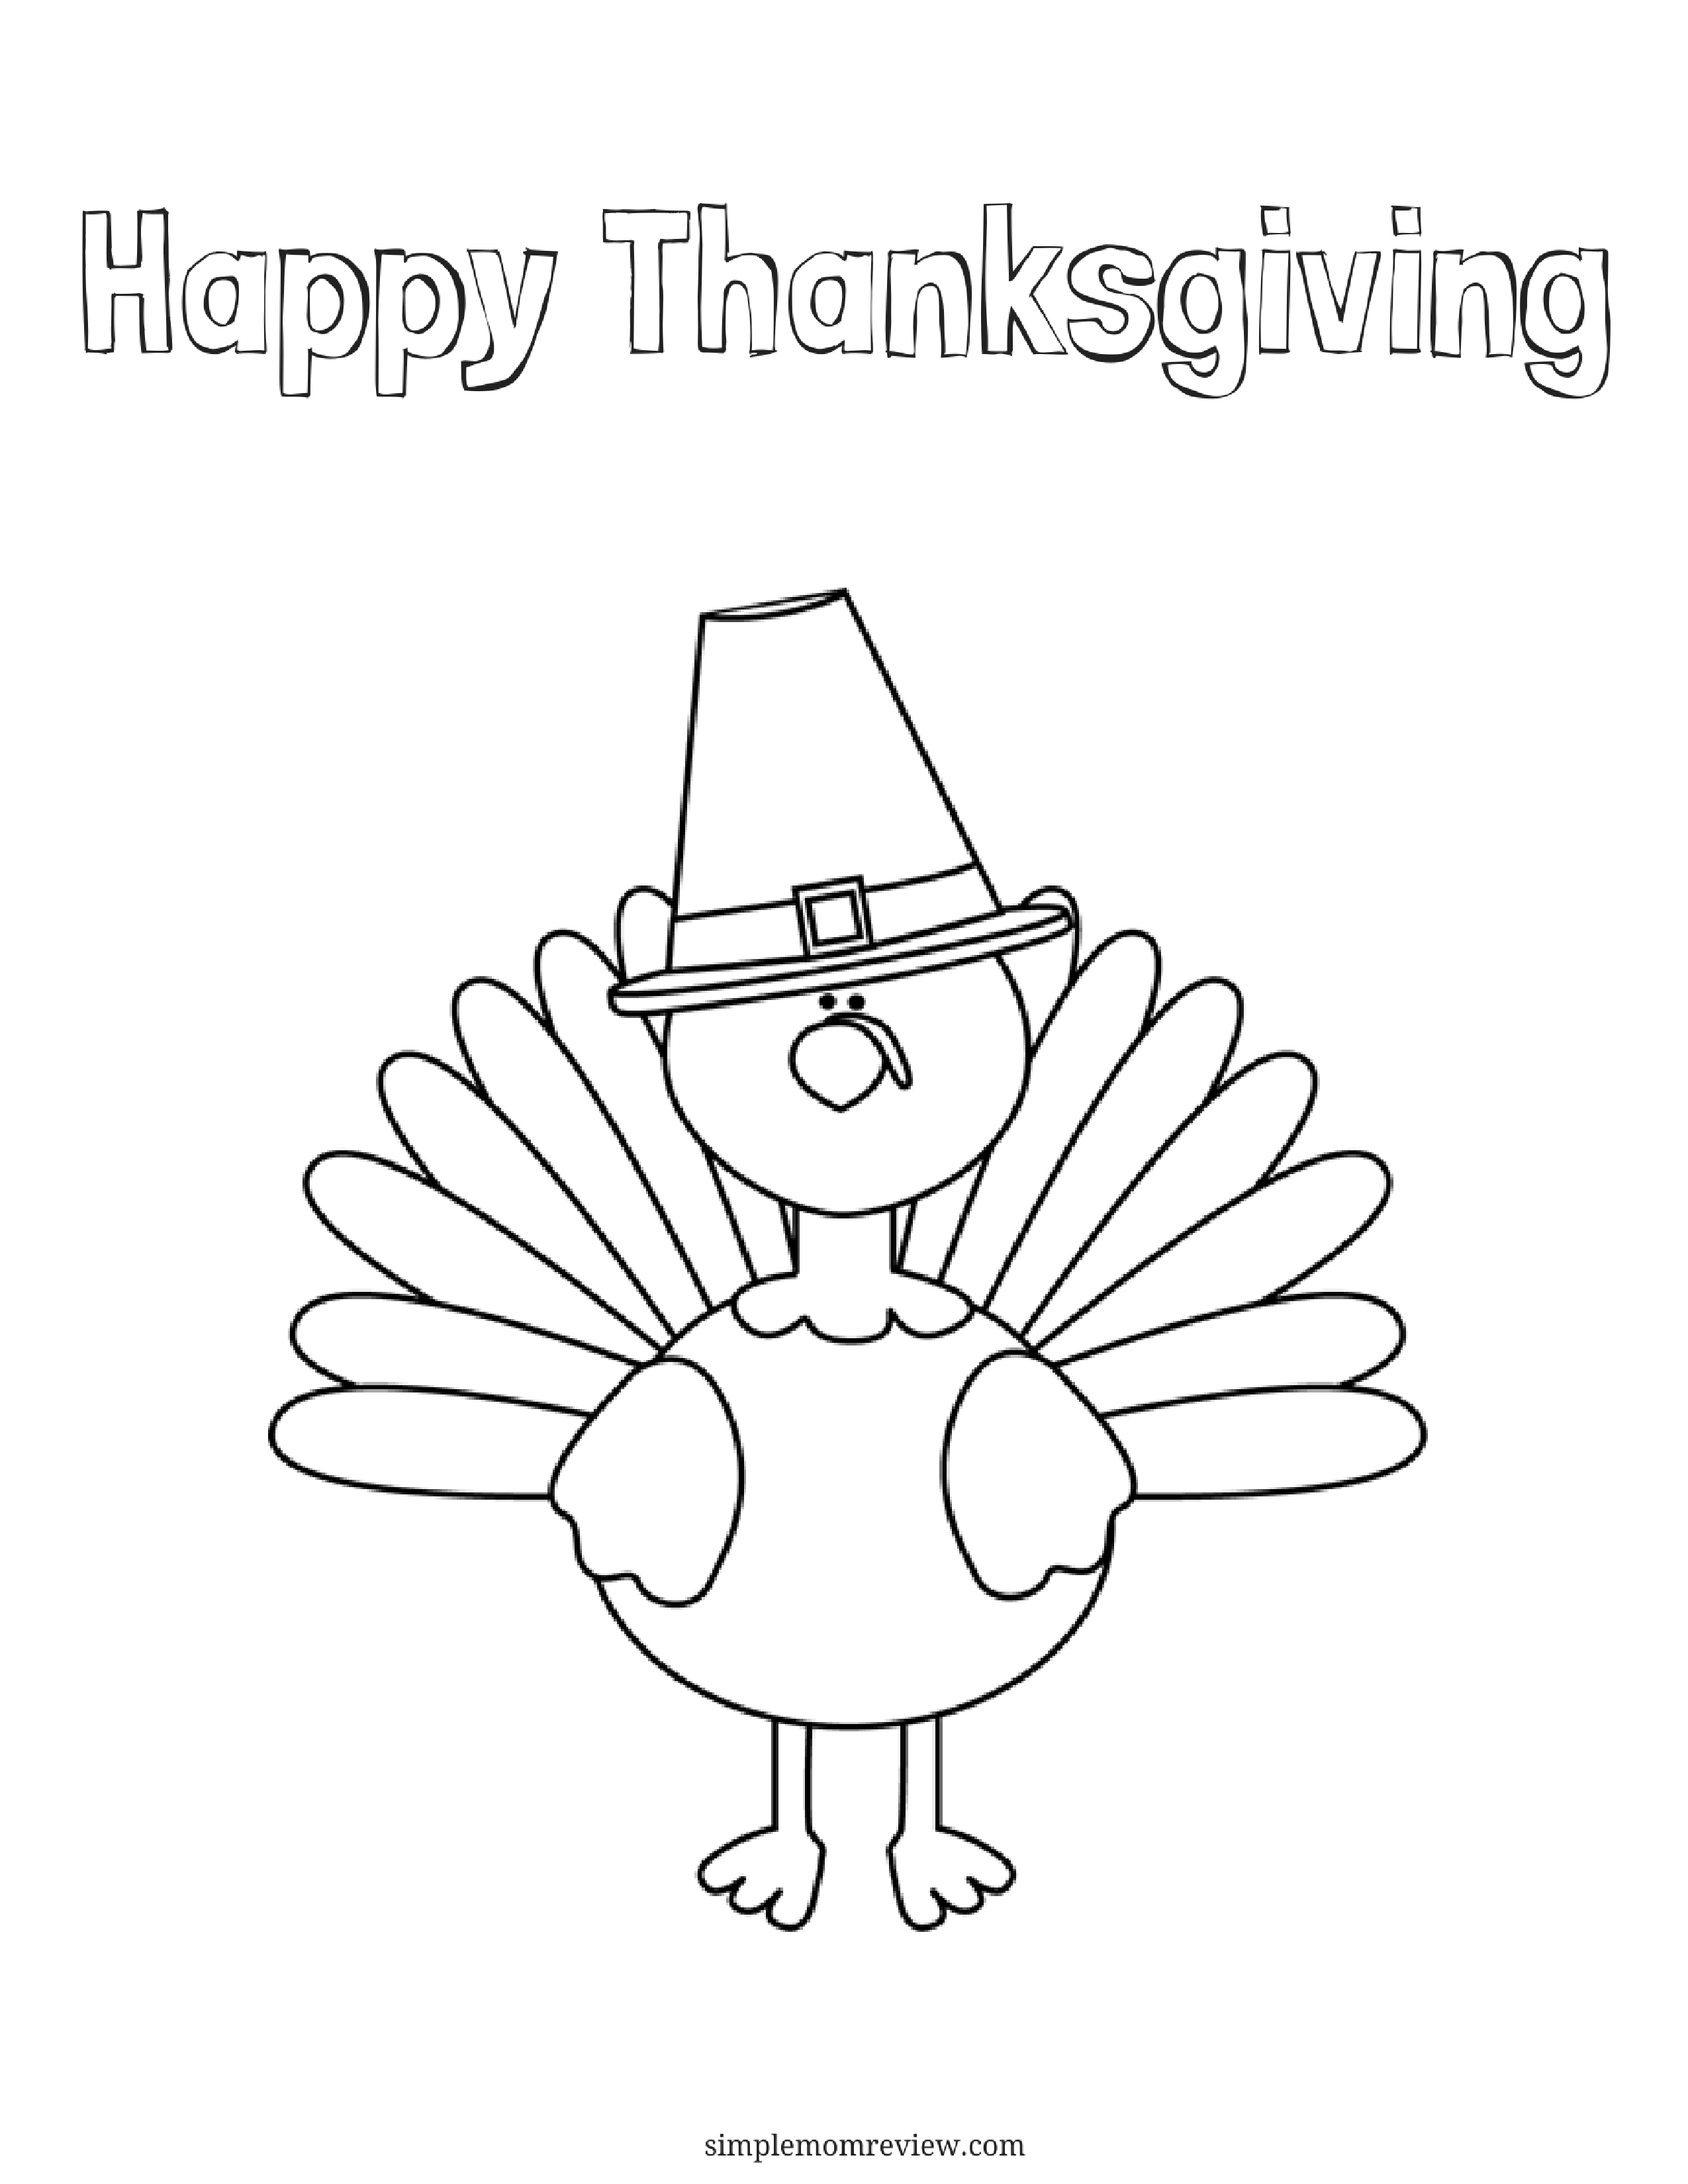 Turkey Coloring Page: Free Printable - Simple Mom Review